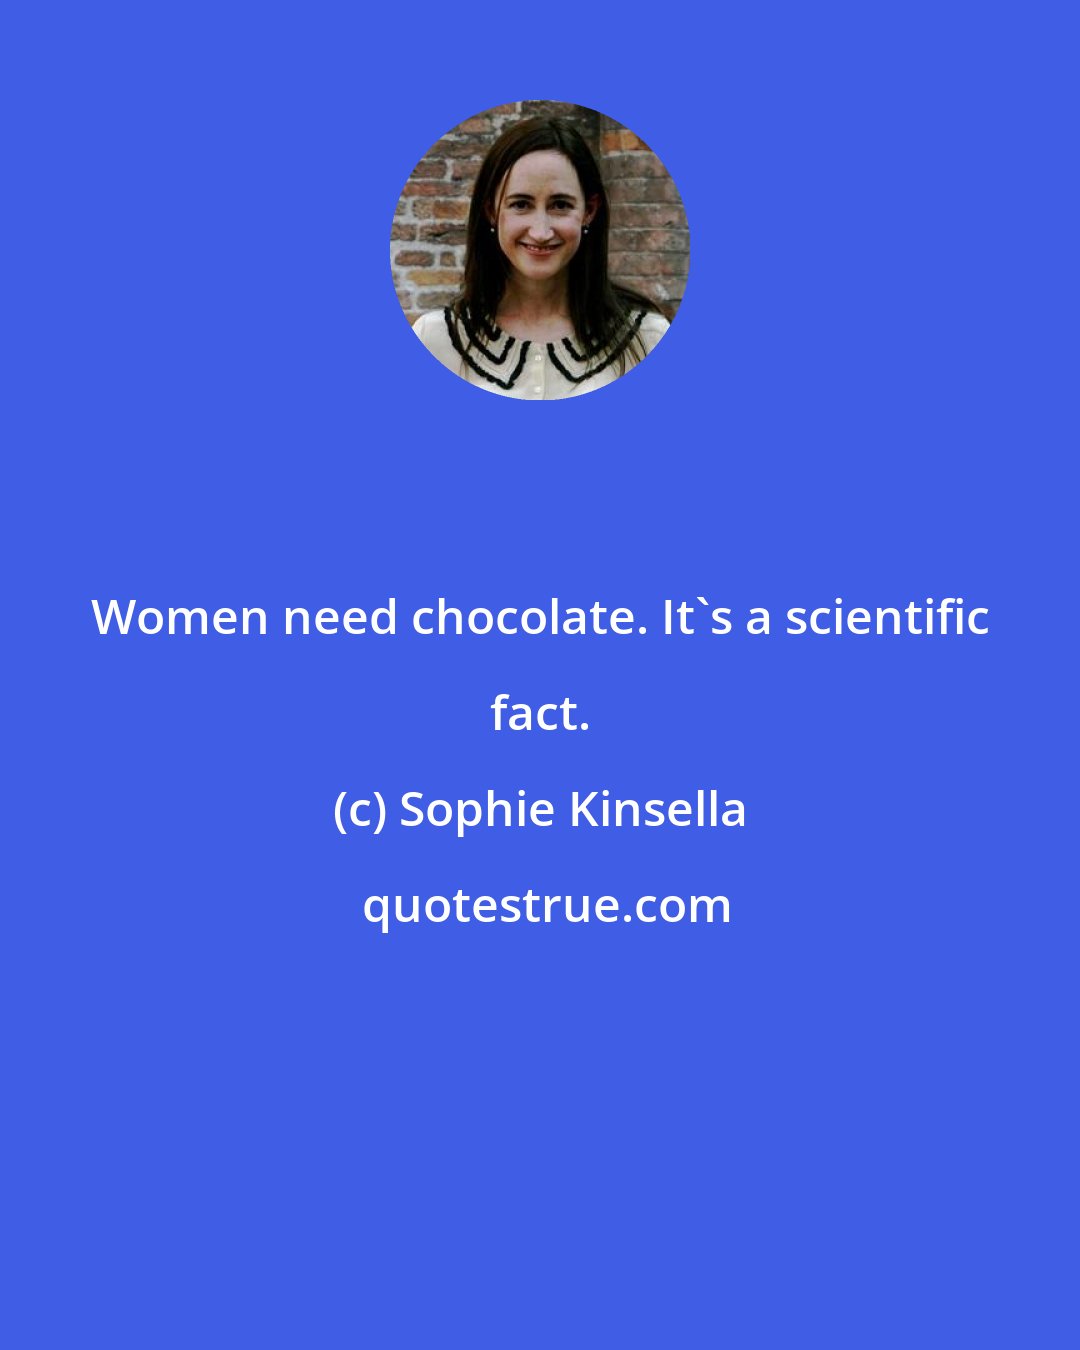 Sophie Kinsella: Women need chocolate. It's a scientific fact.